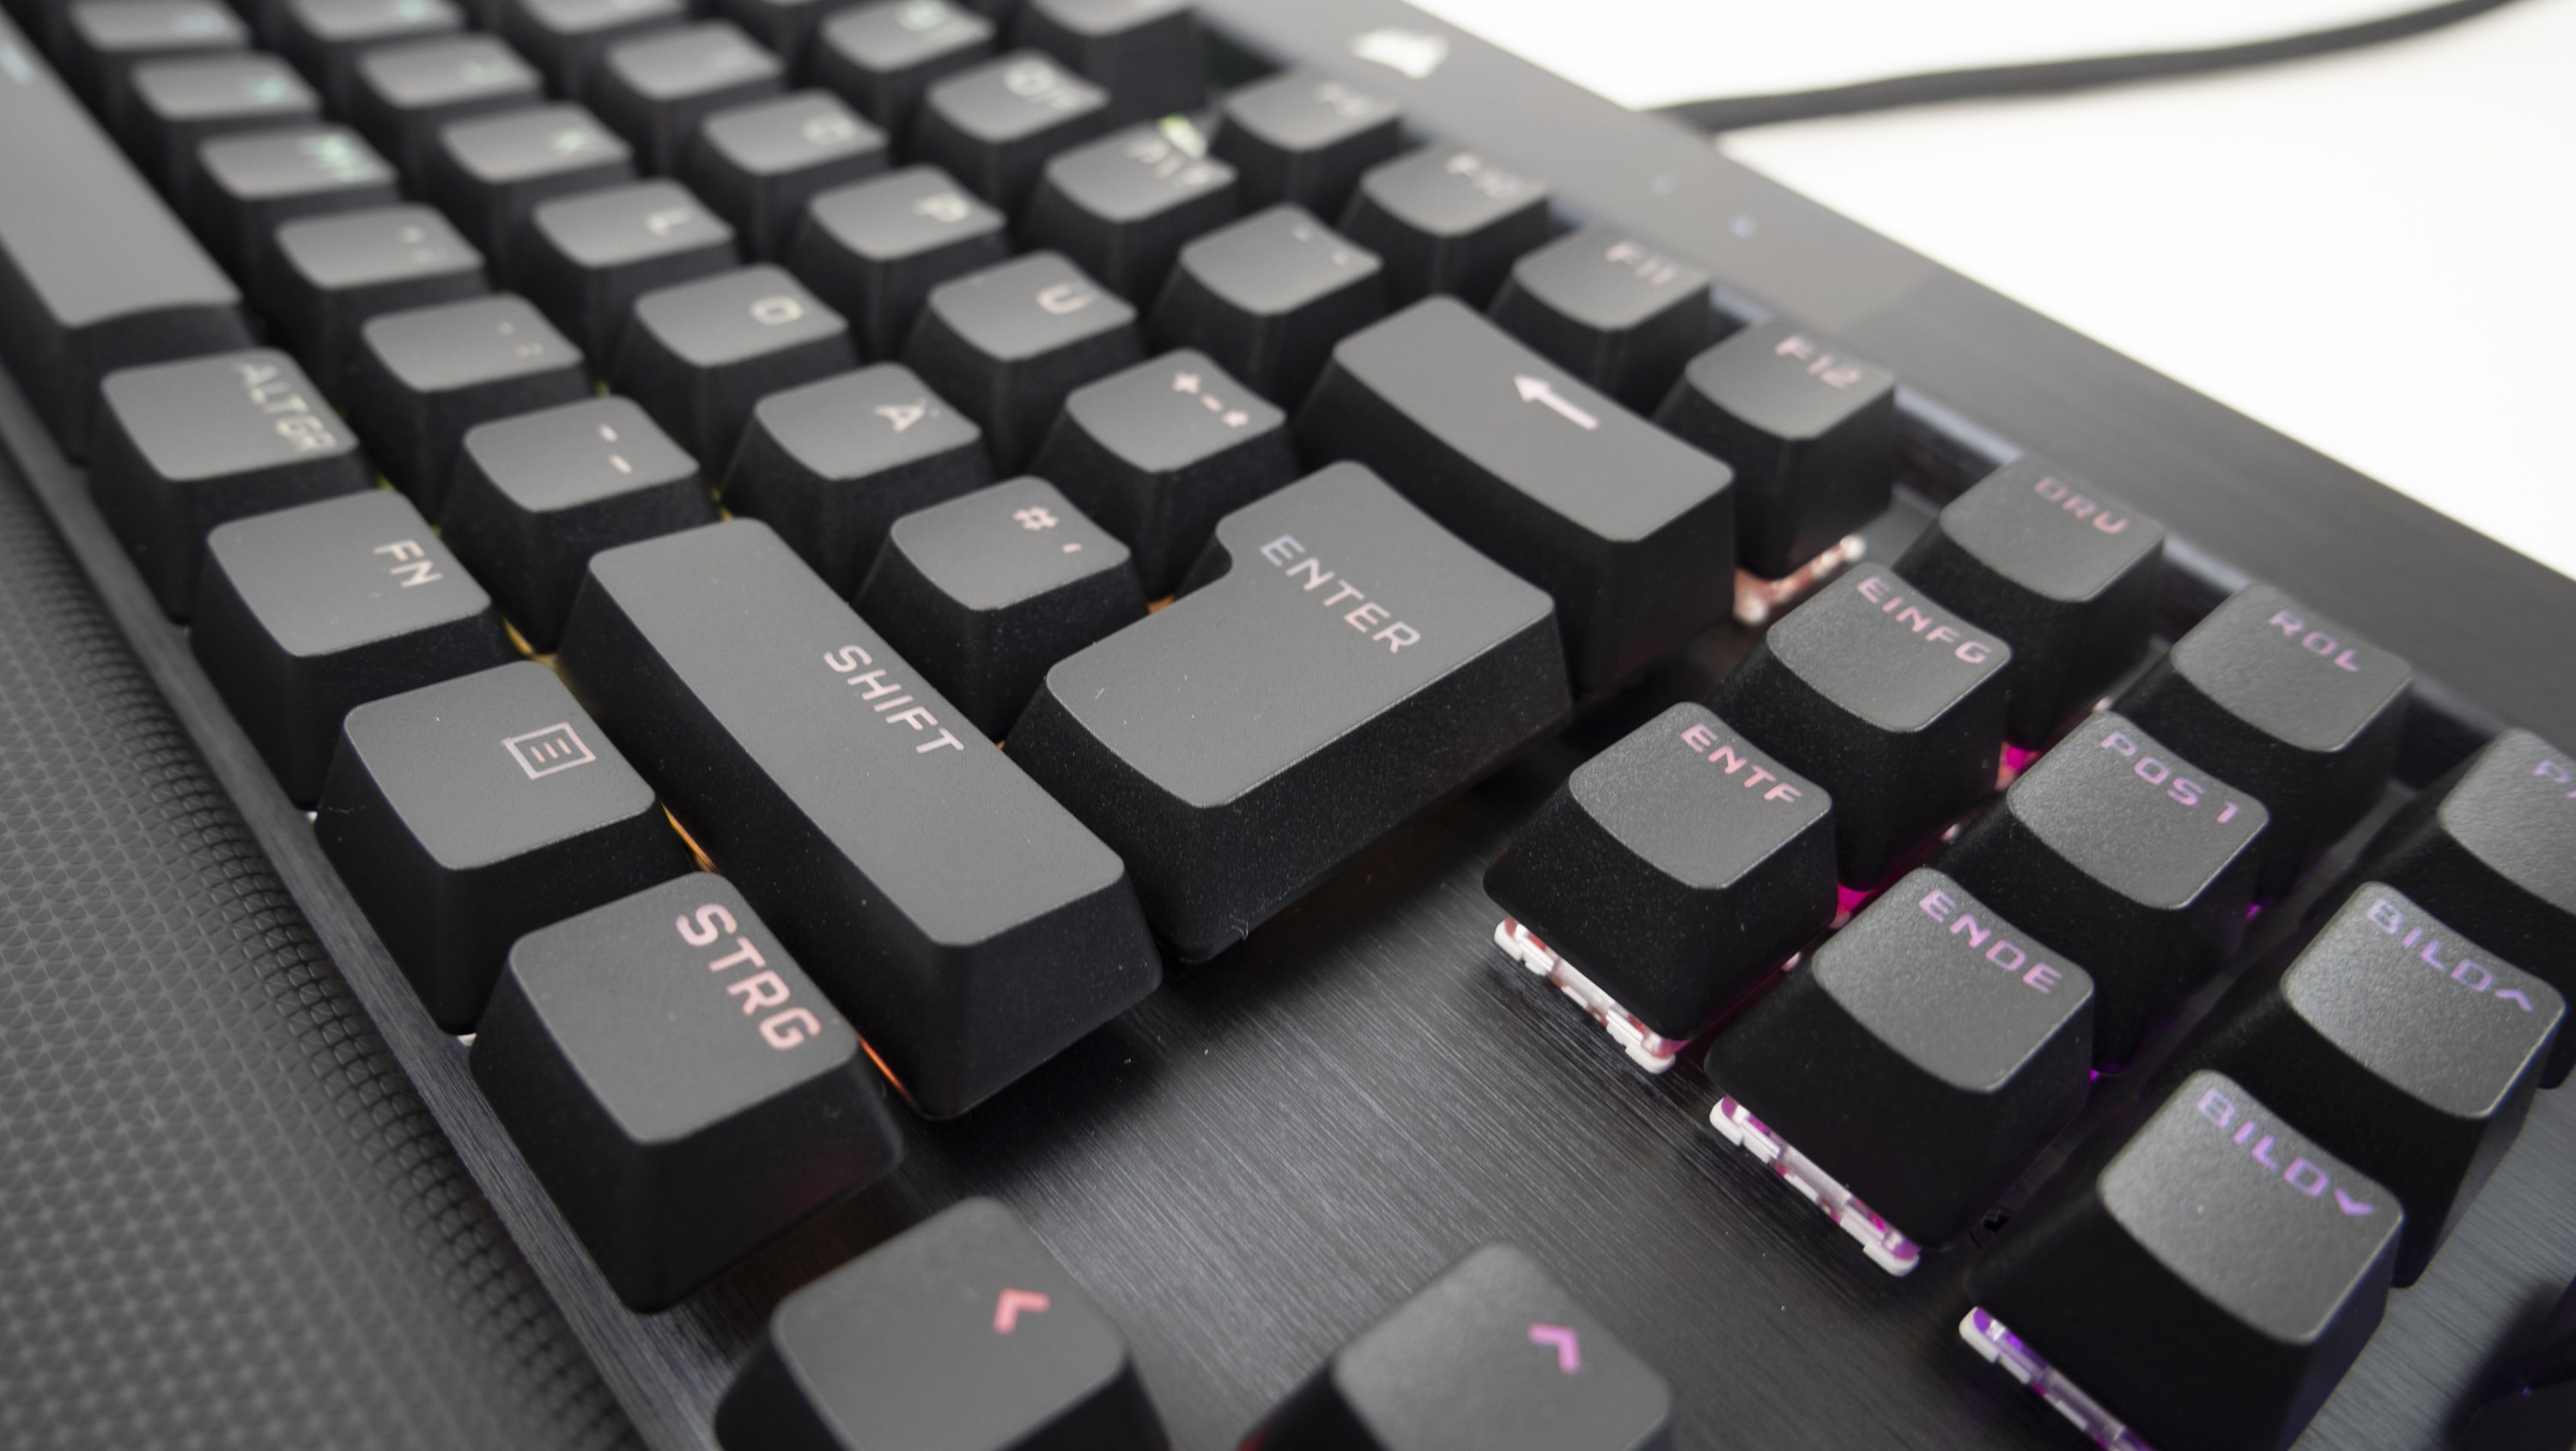 Corsair K100 RGB: The new non plus ultra under the gaming keyboards